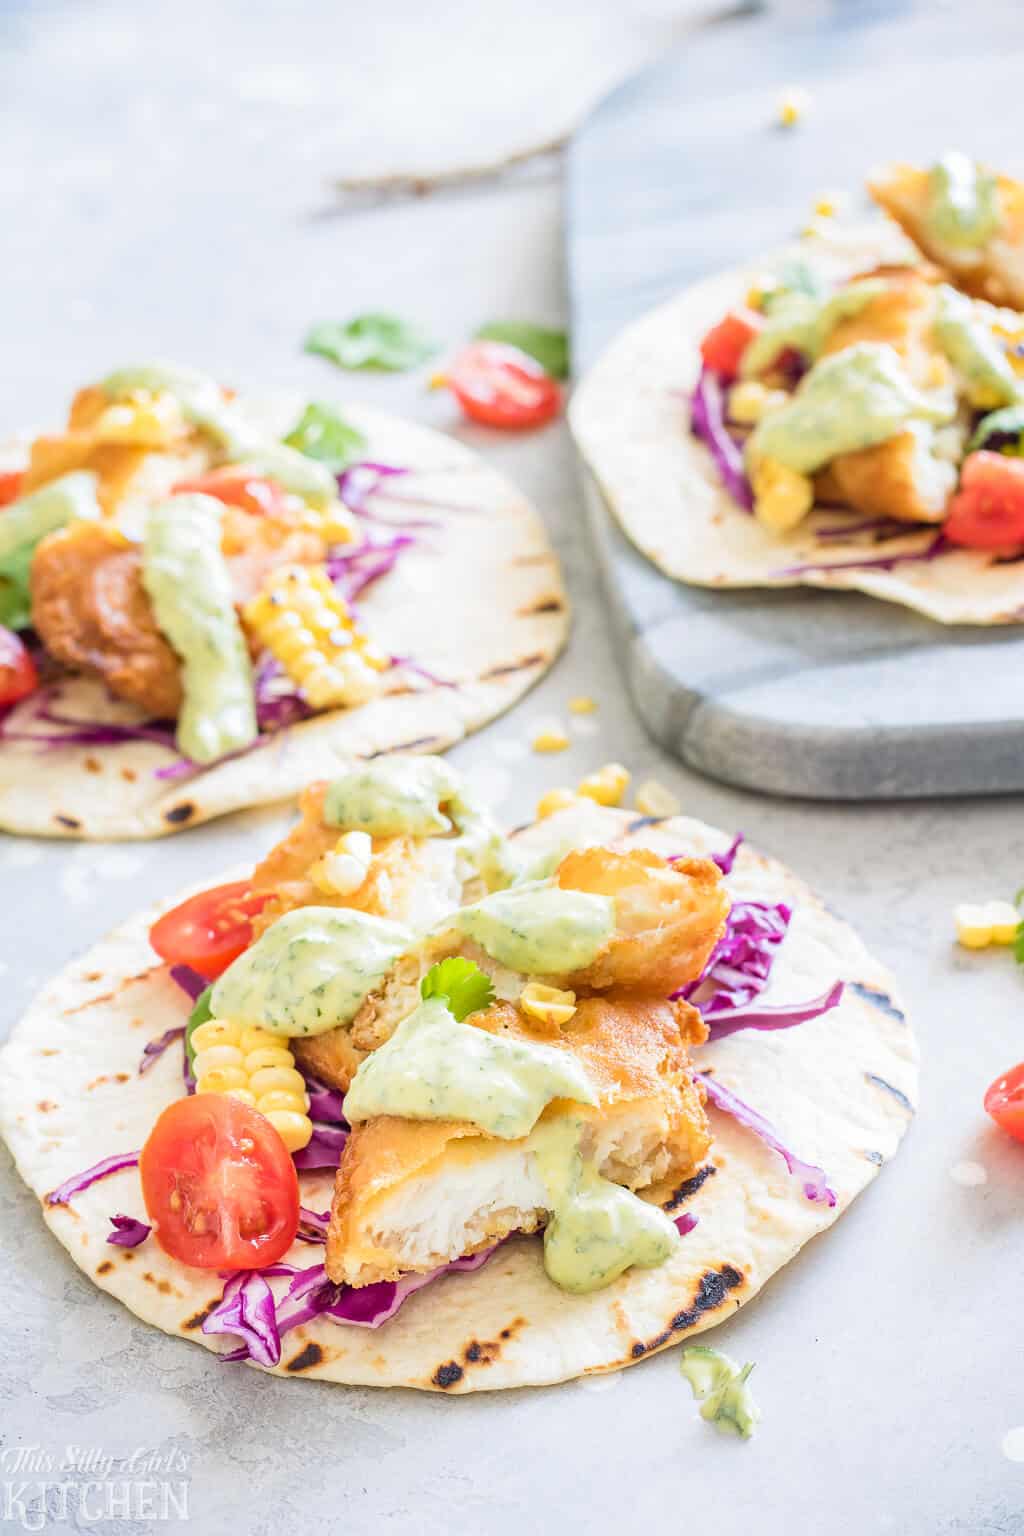 Easy Fish Tacos with Creamy Chimichurri Sauce, an easy weeknight meal you will make again and again! #Recipe from ThisSillyGirlsKitchen.com #fishtaco #taco #chimichurri